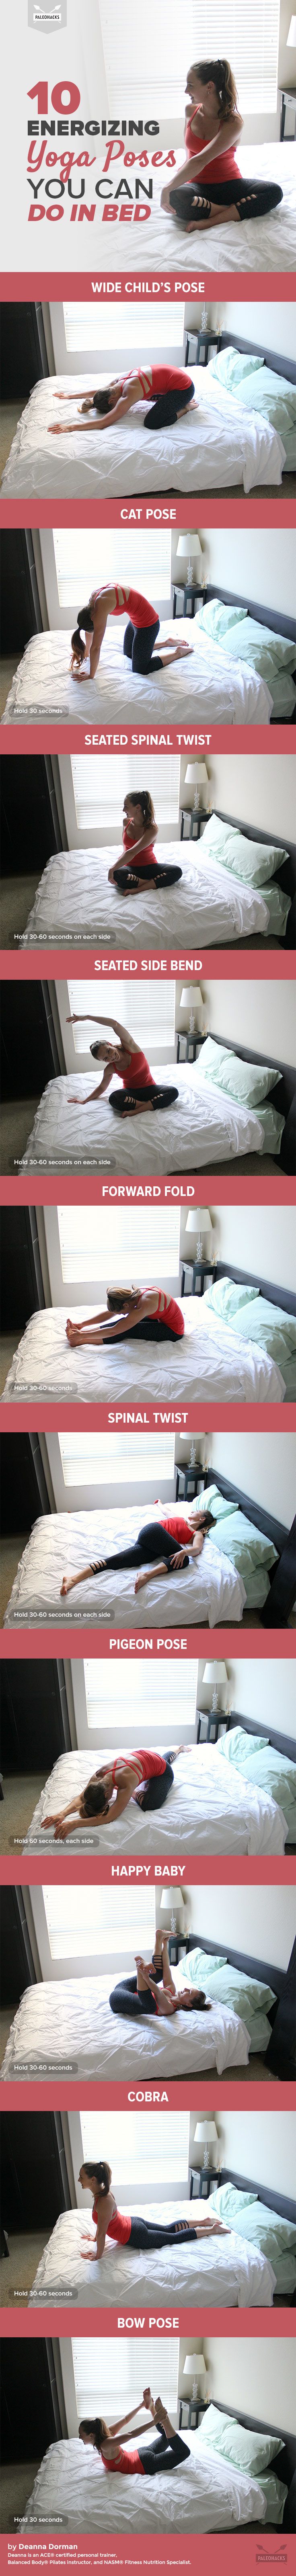 yoga in bed infographic